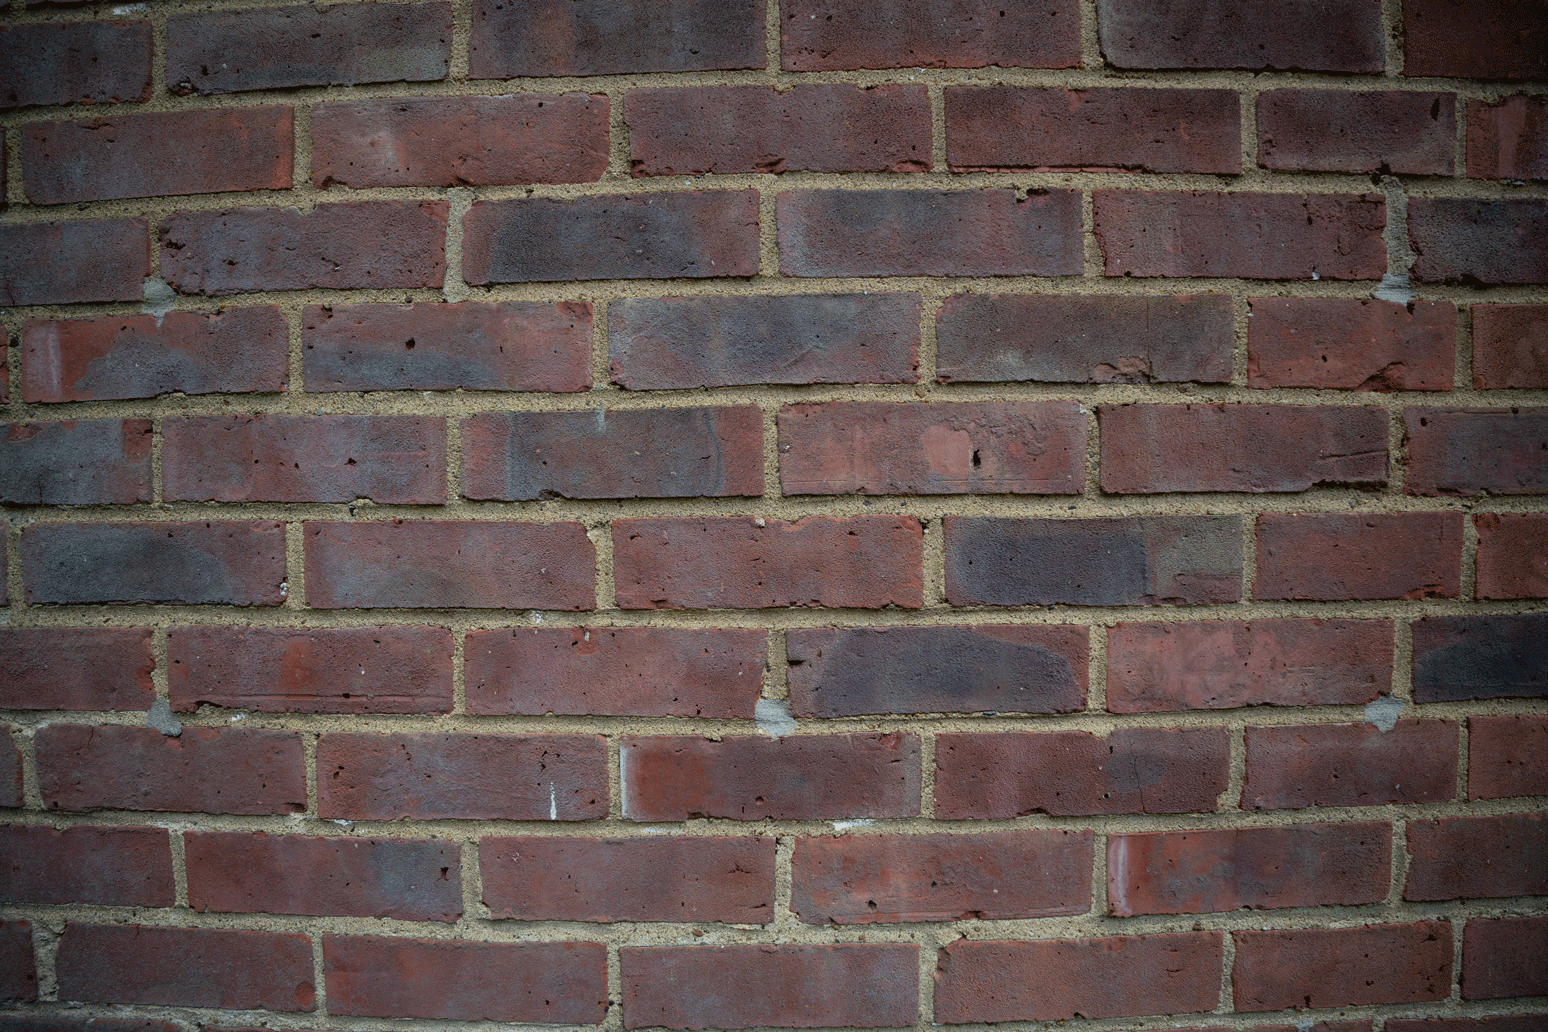 Sigma 10-18mm f/2.8 lens distortion test GIF of a brick wall